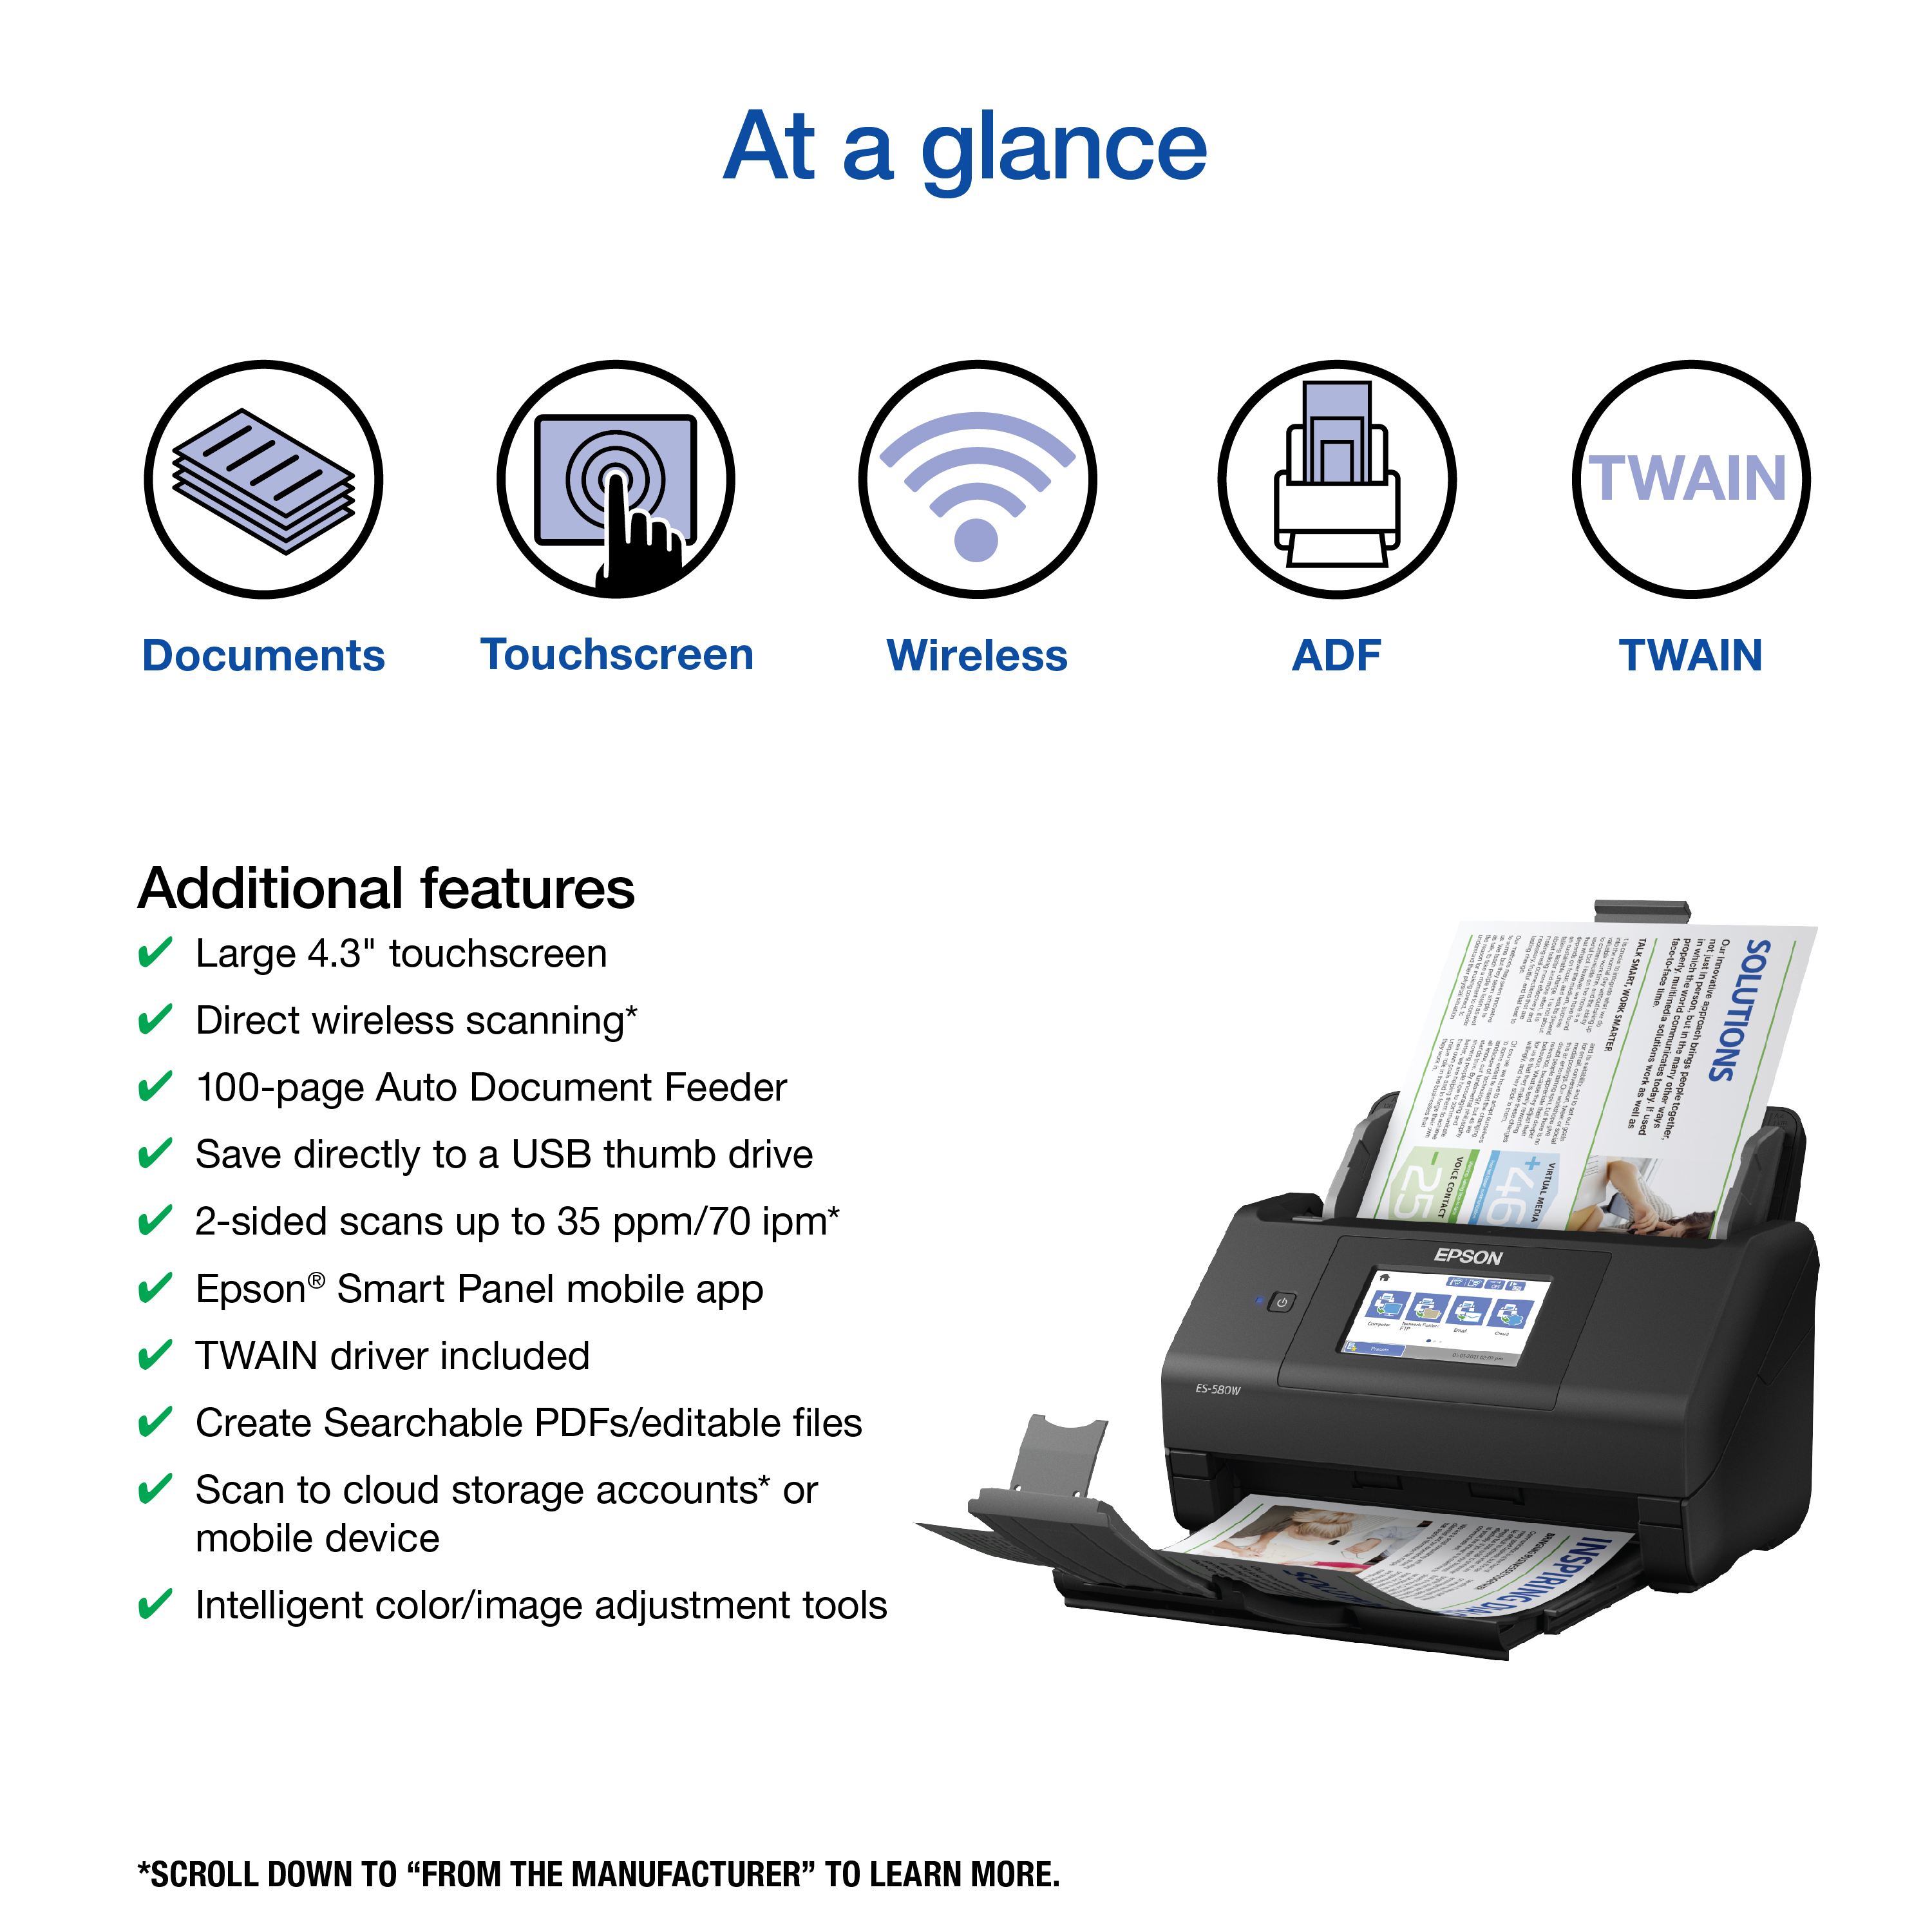 Epson WorkForce ES-580W Wireless Color Duplex Desktop Document Scanner for  PC and Mac with 100-sheet Auto Document Feeder (ADF) and Intuitive 4.3